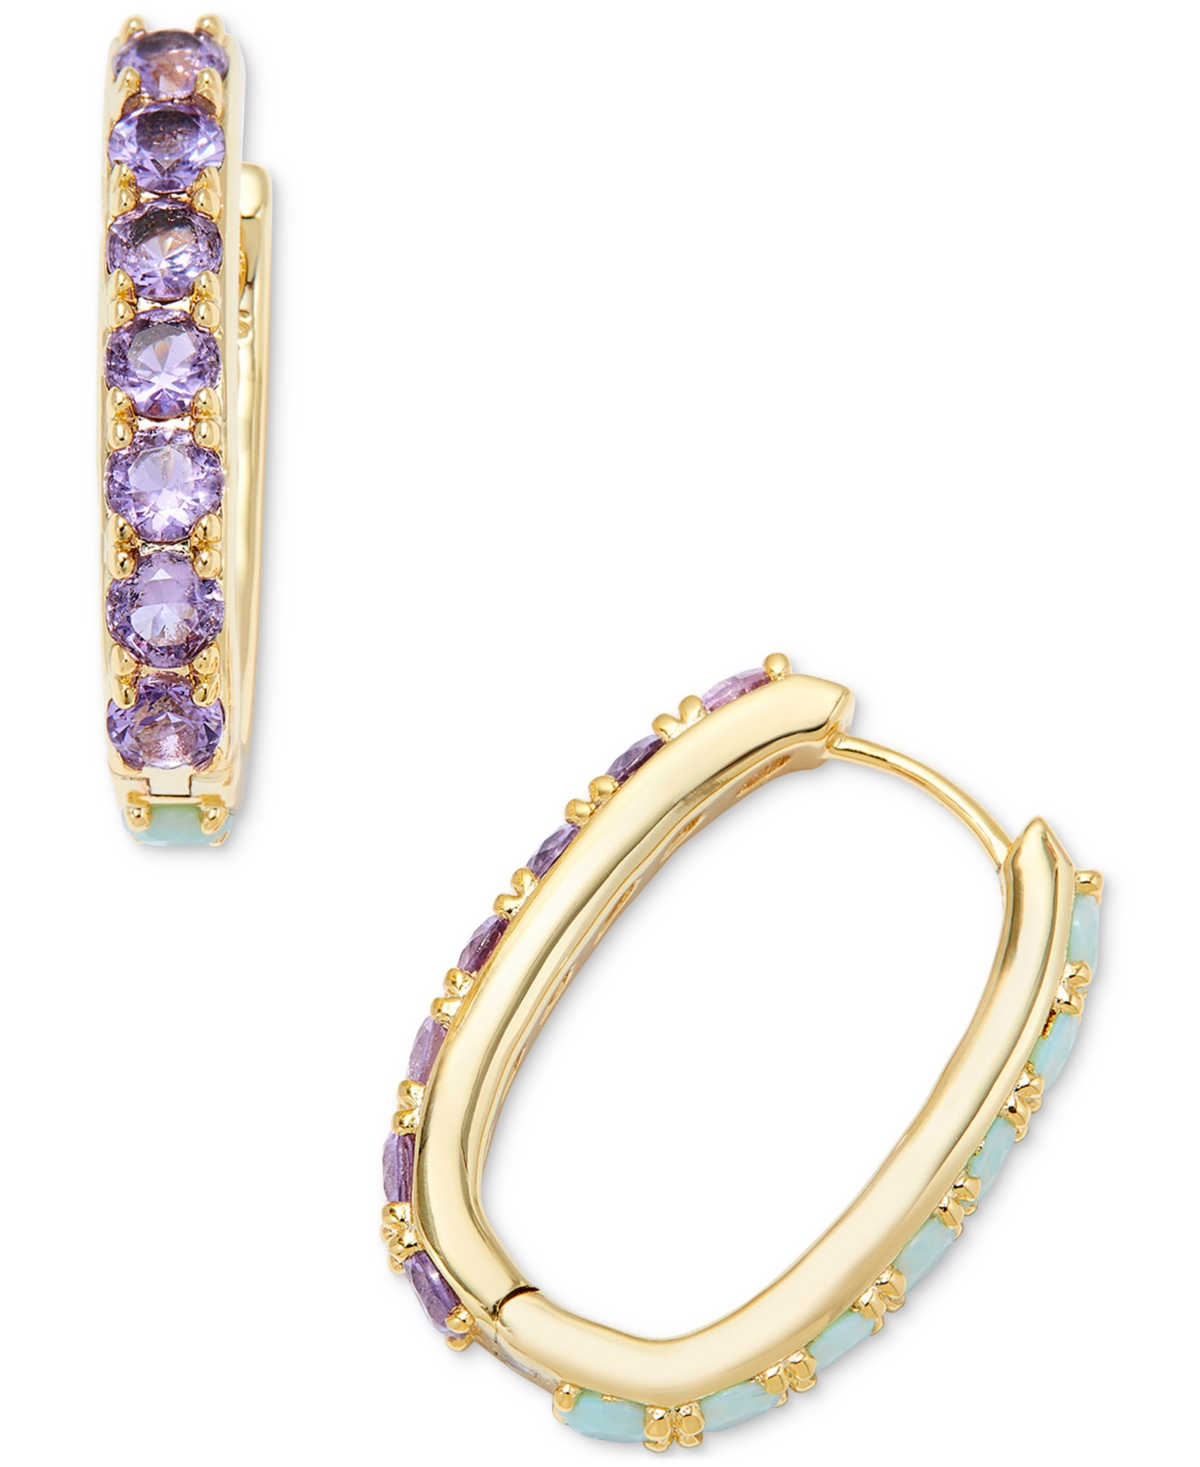 14k Gold-Plated Mixed Stone Oval Hoop Earrings - White Opalite Mix